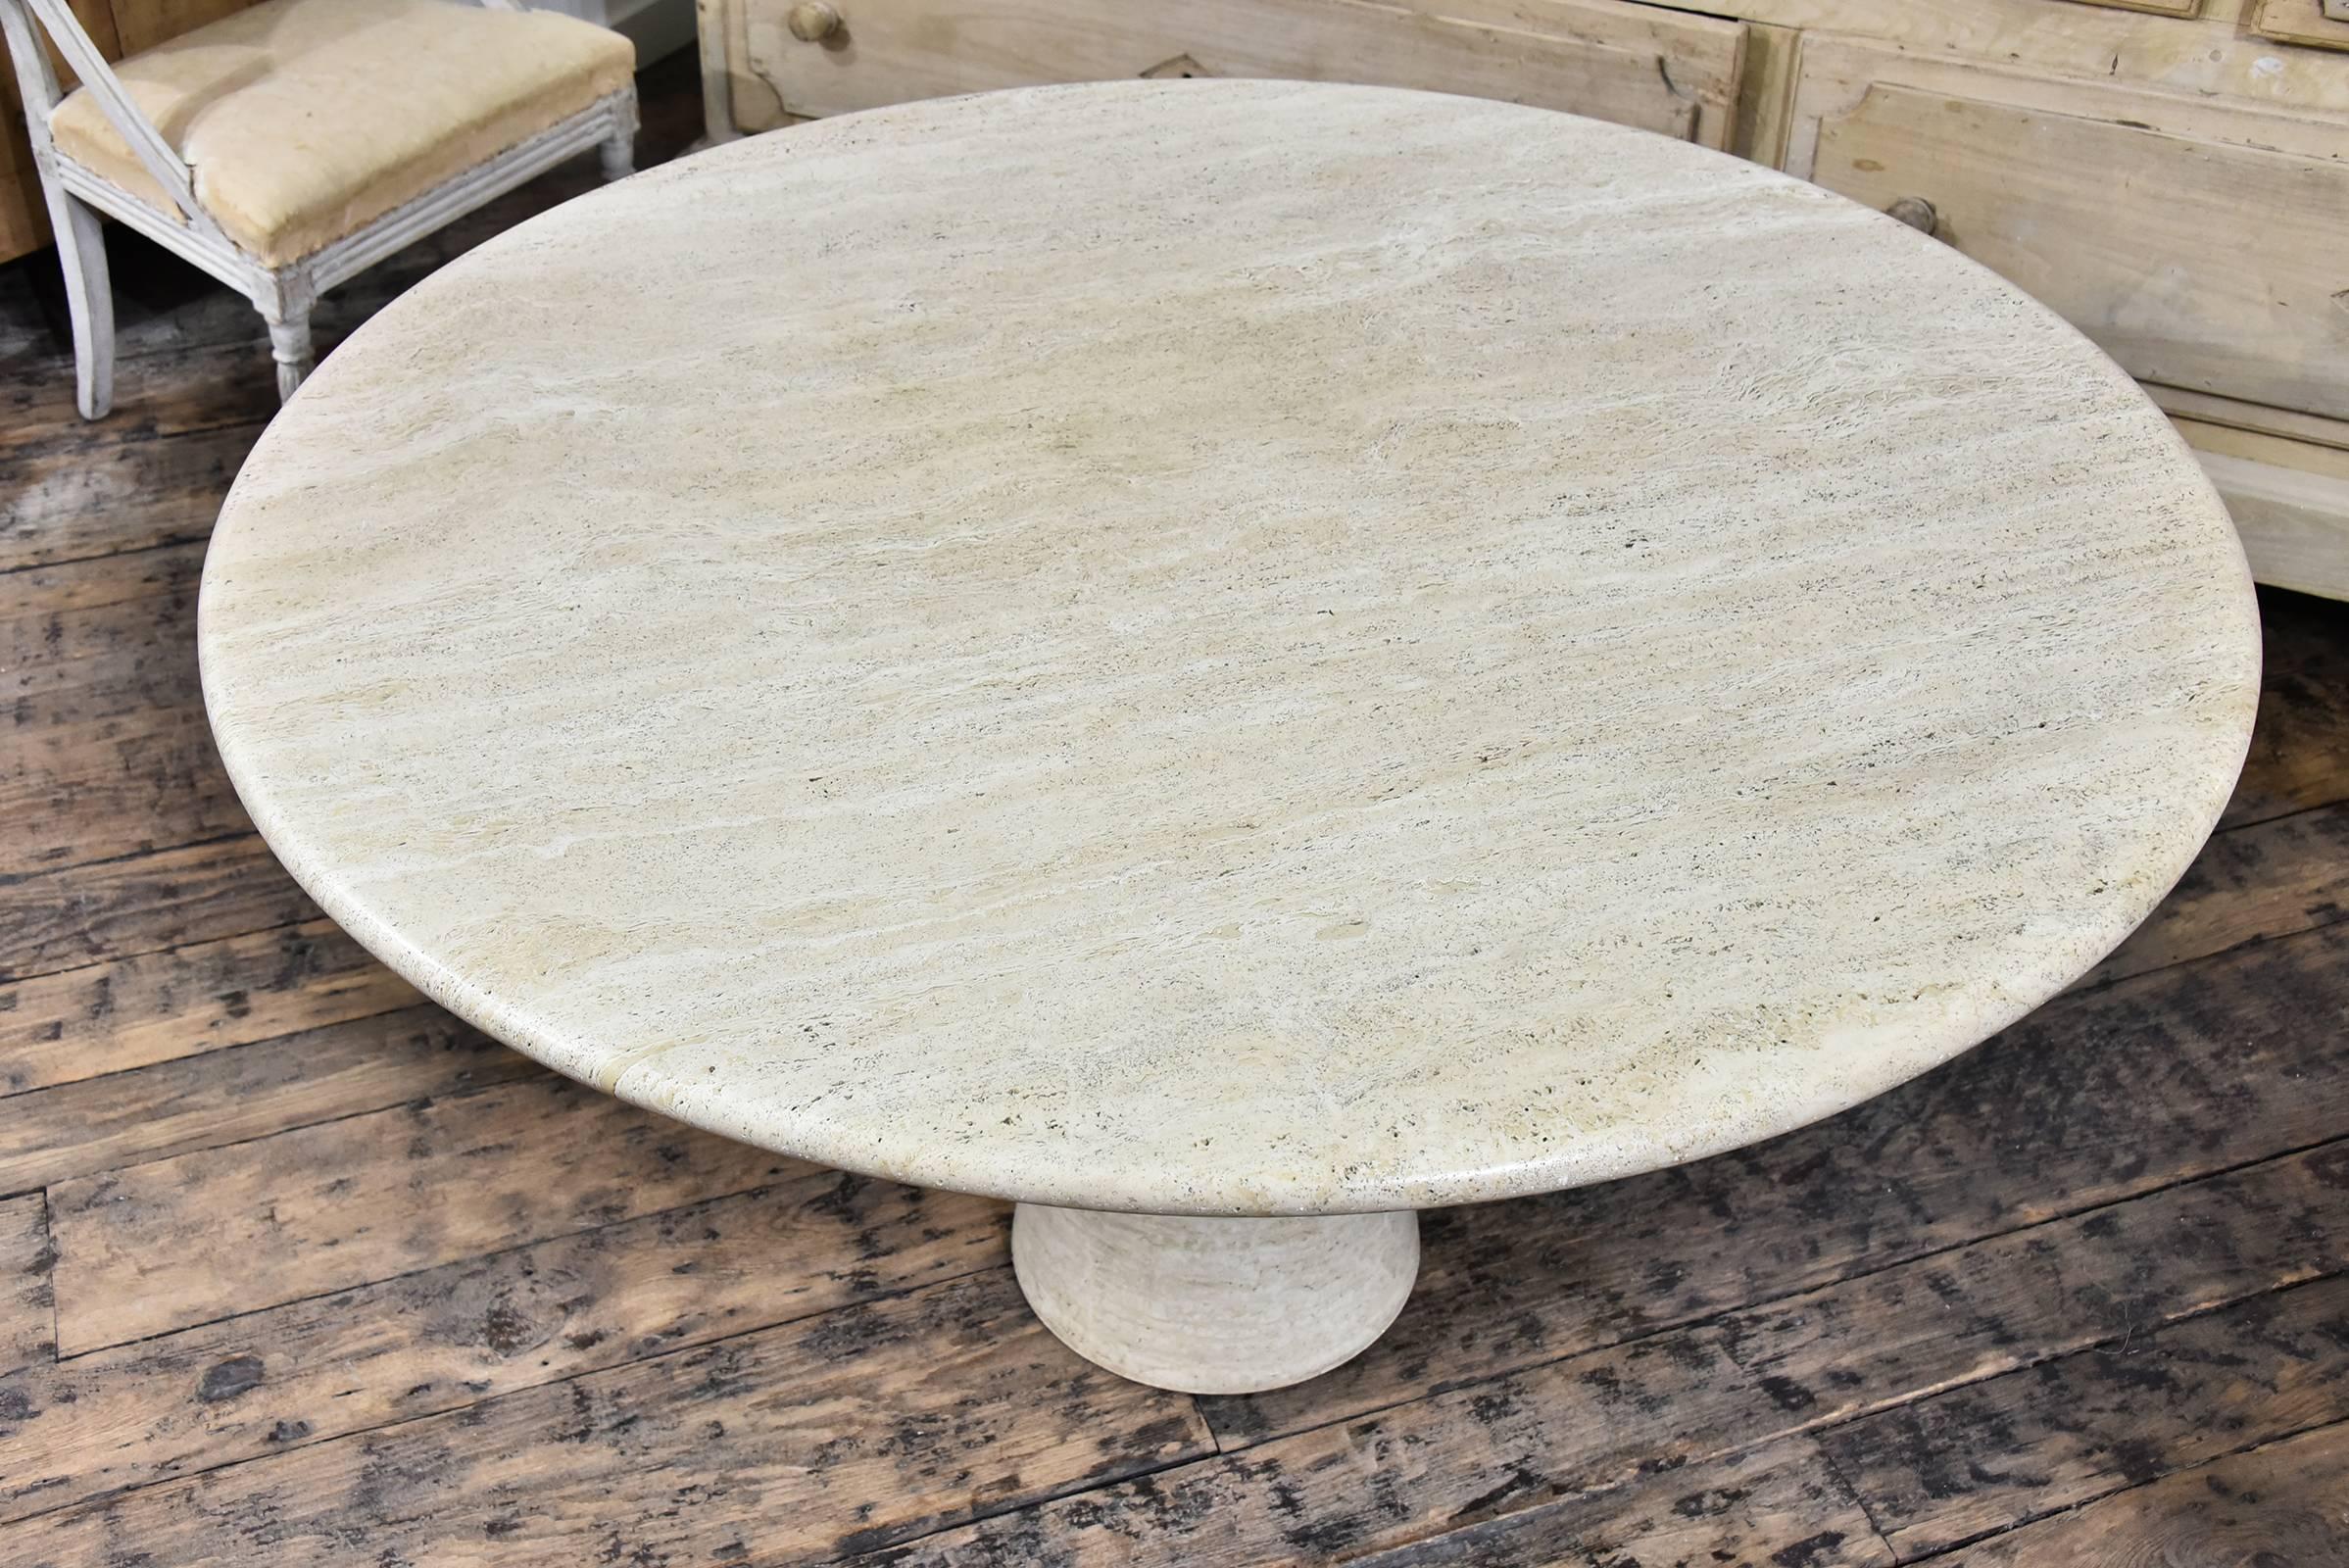 Sophisticated travertine pedestal table in warm cream and beige tones, excellent condition.